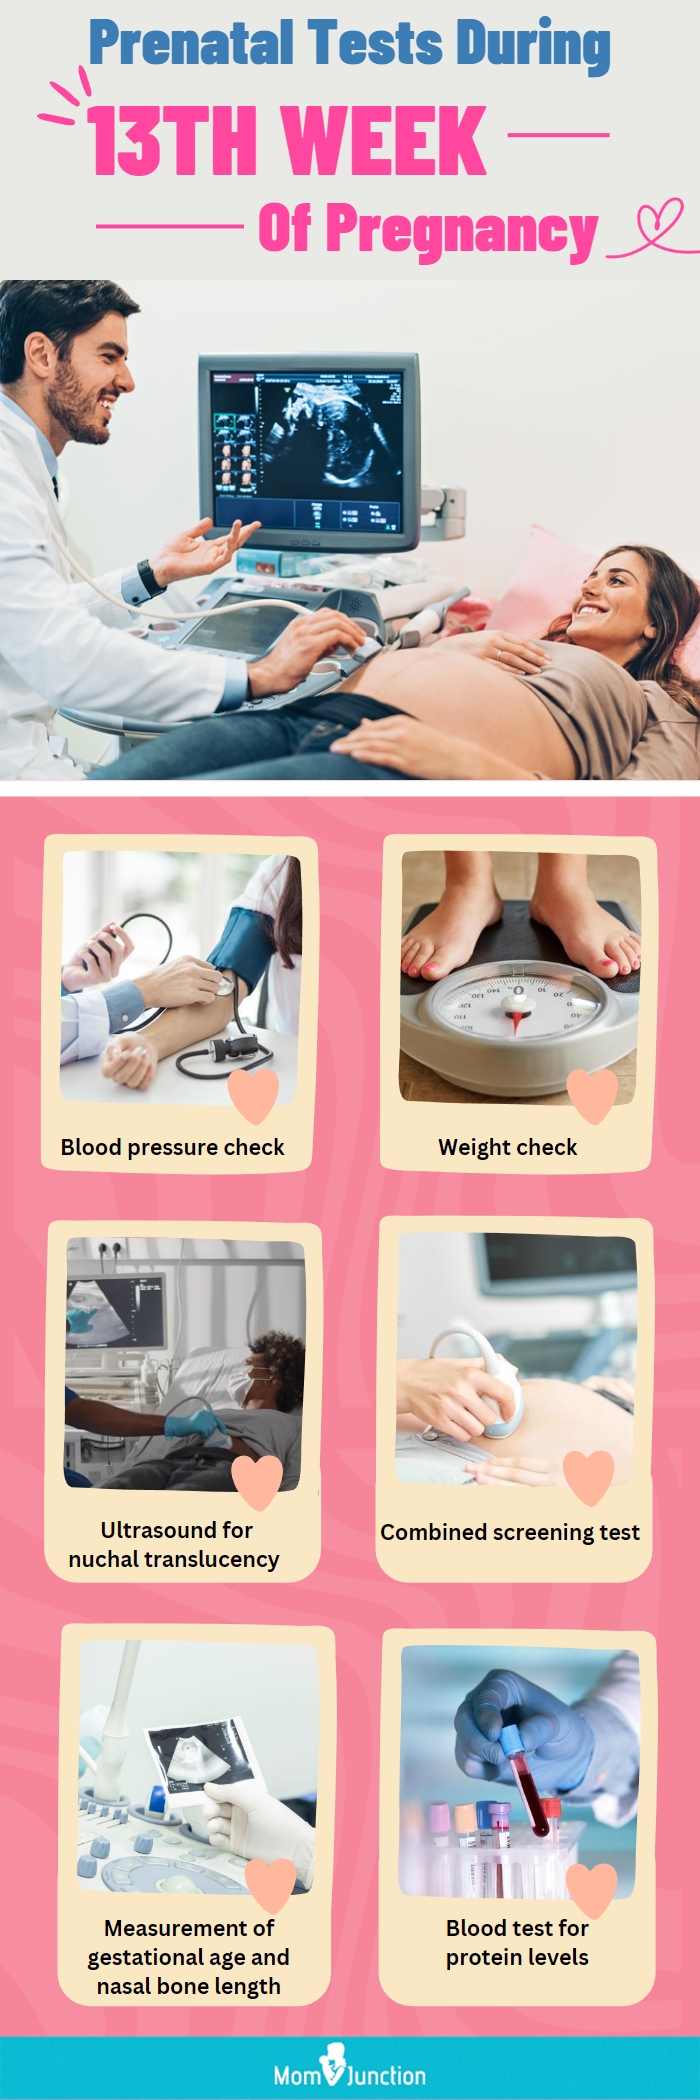 prenatal tests during 13th week of pregnancy (infographic)